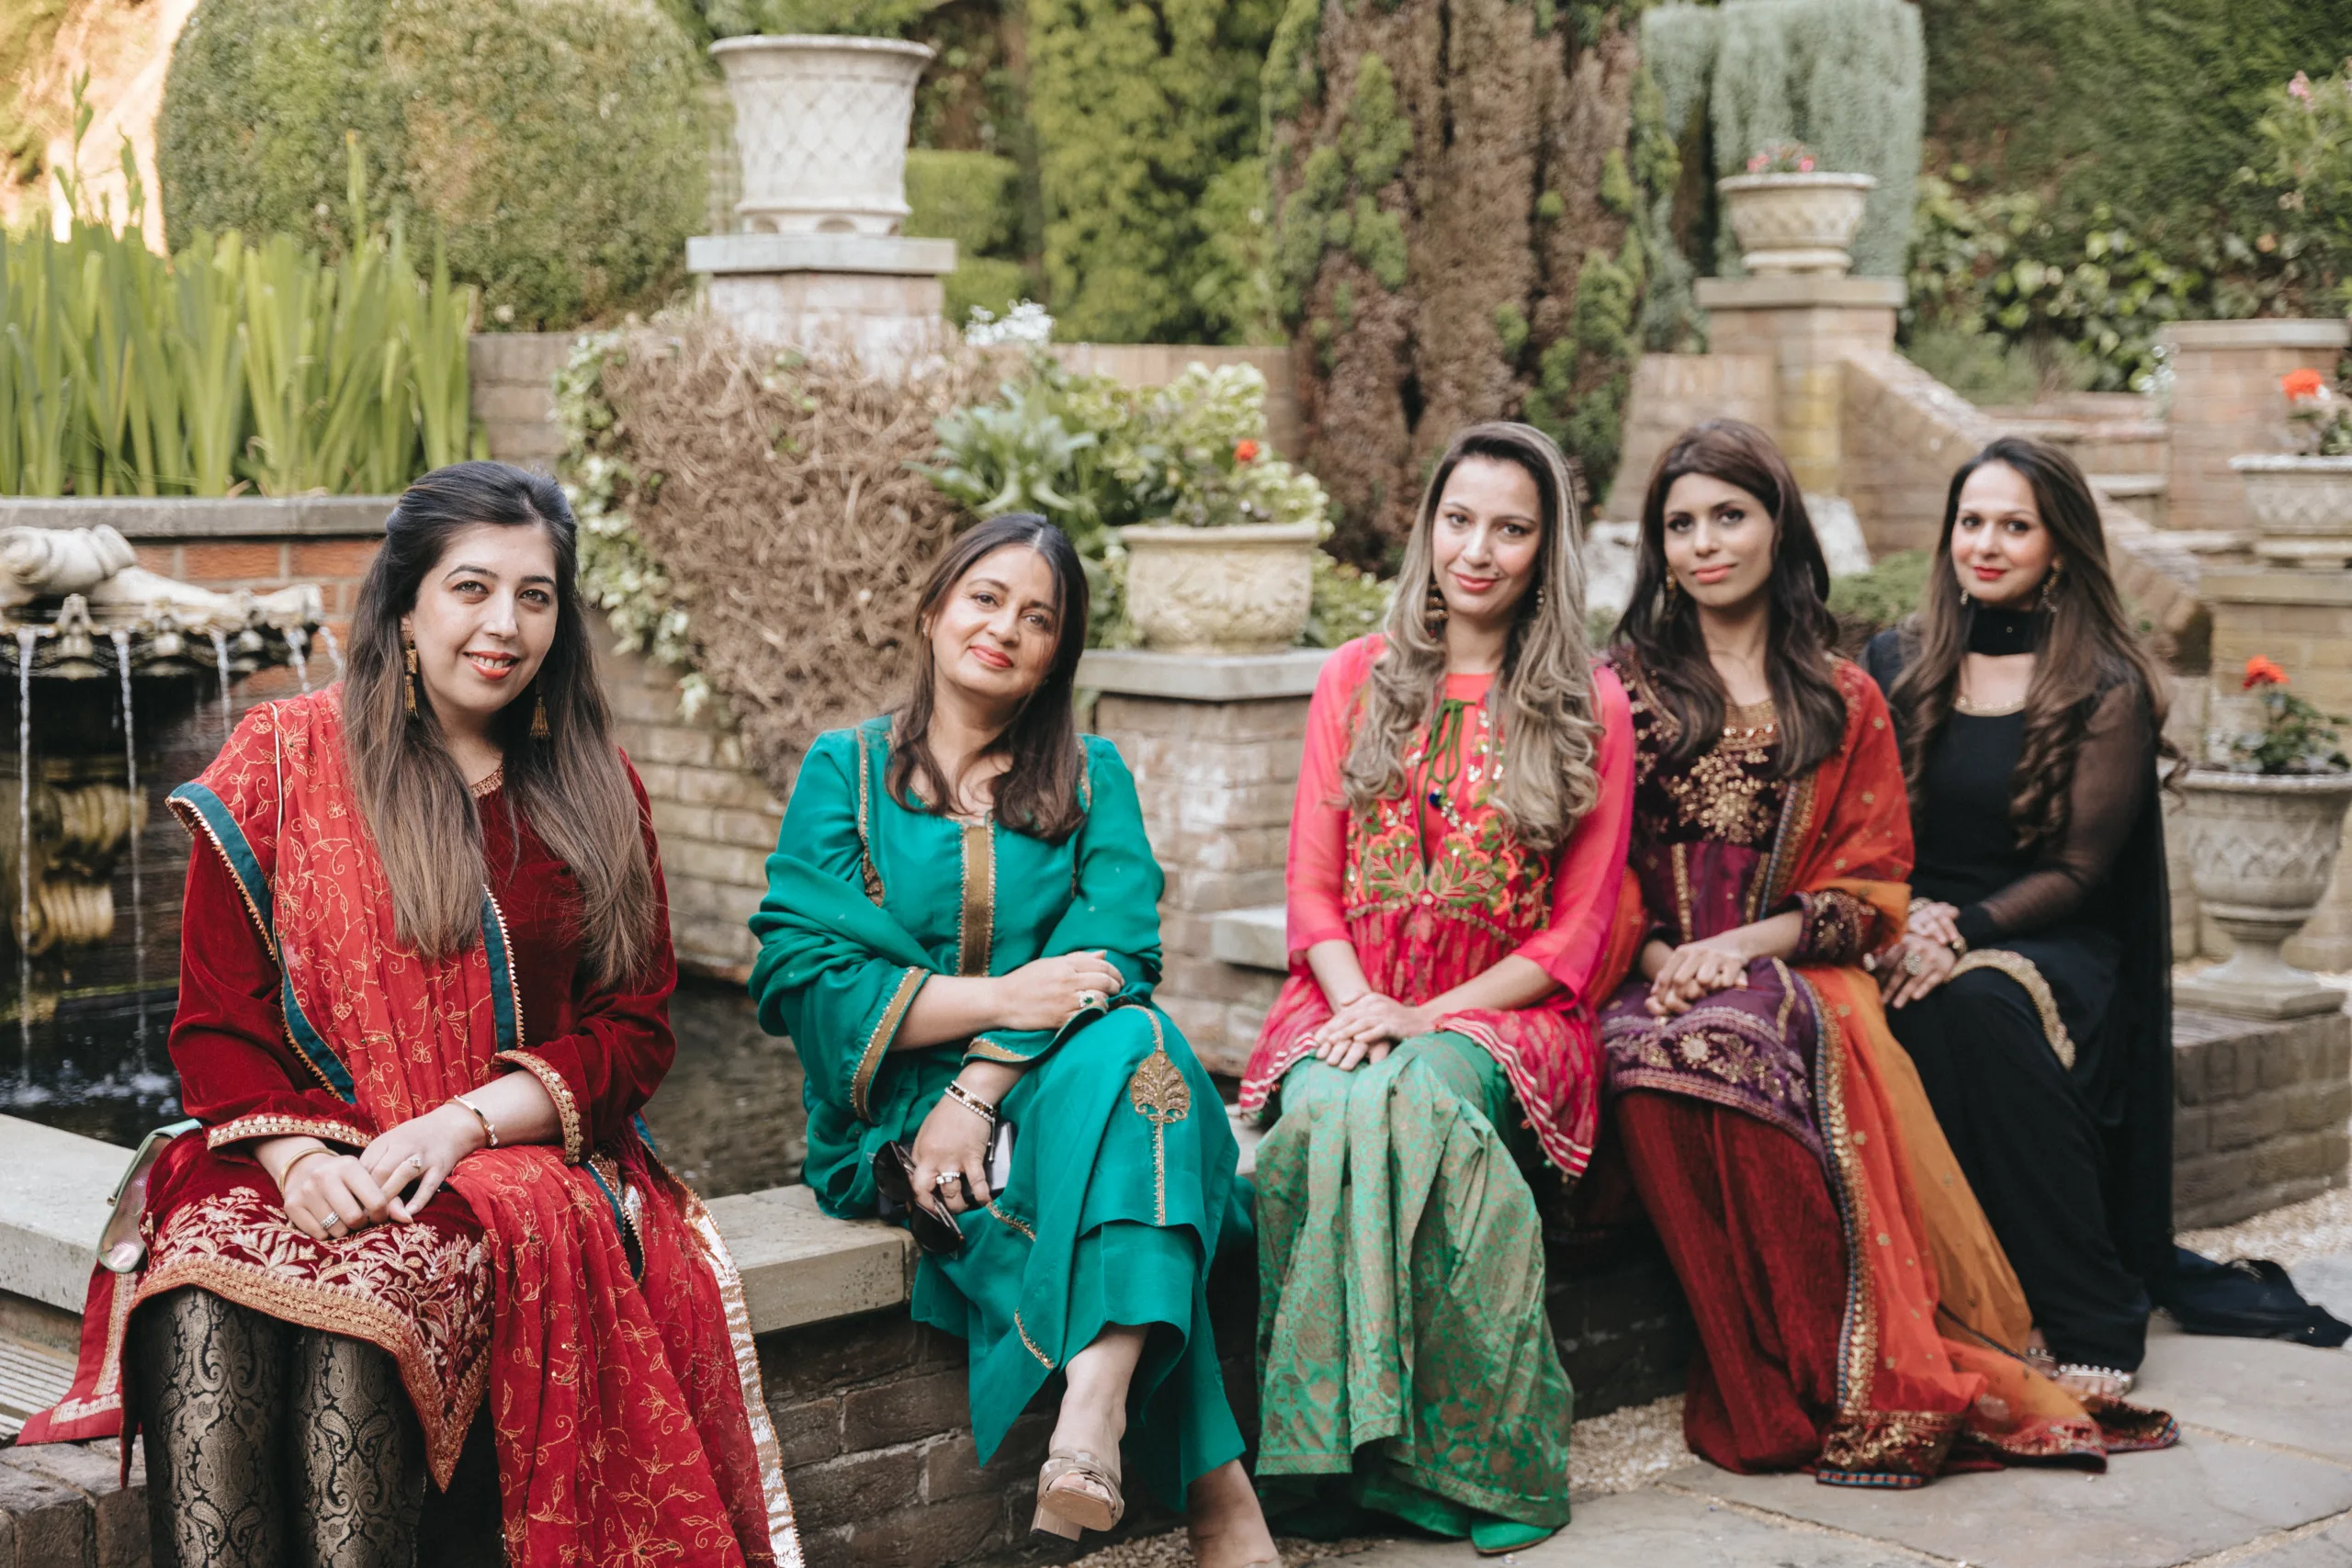 A group of Indian women posing in front of a fountain in Yorkshire.